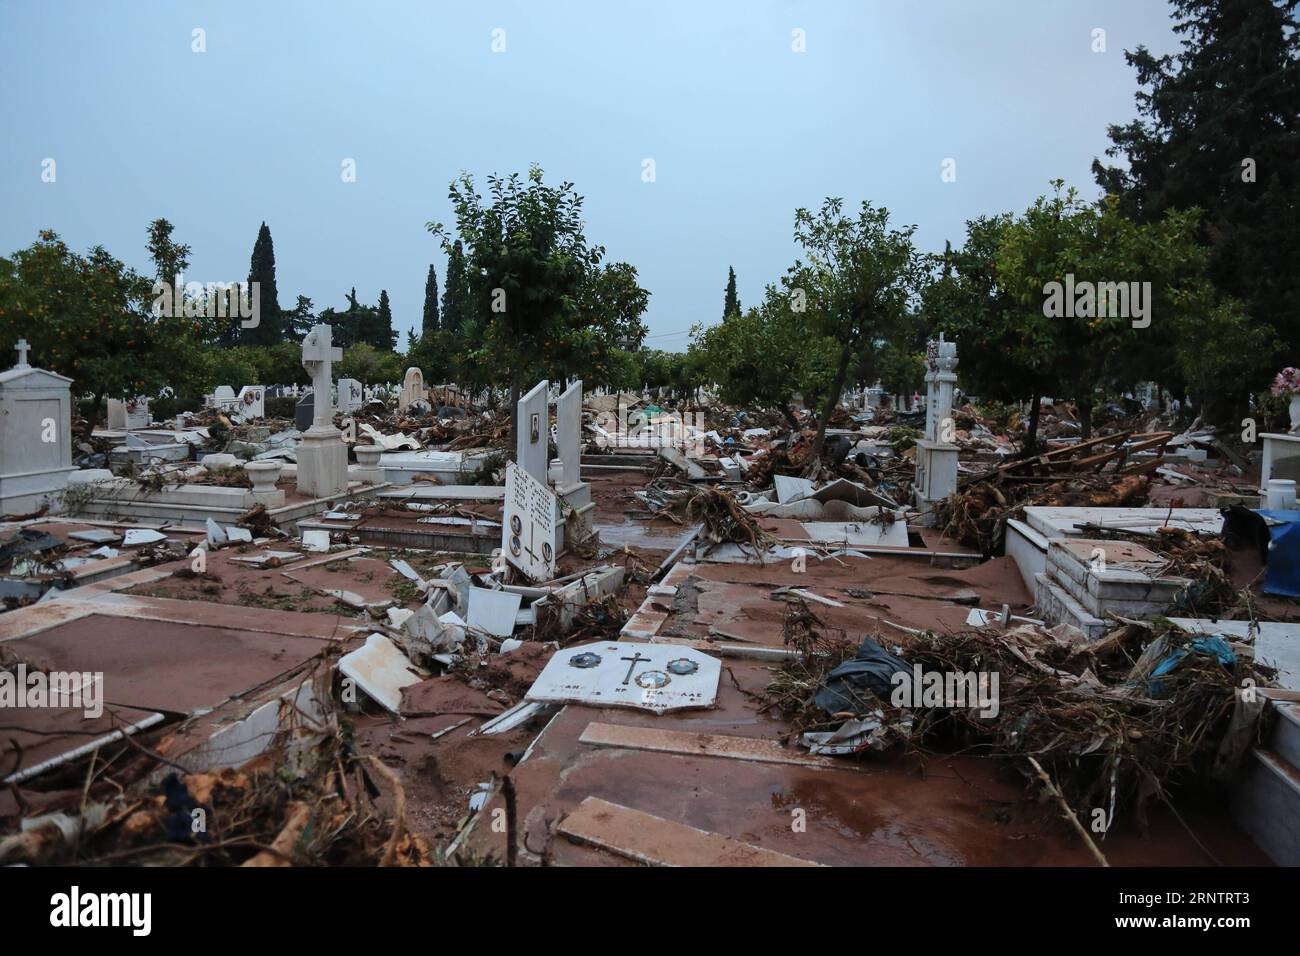 (171117) -- ATHENS, Nov. 17, 2017 -- Photo taken on Nov. 16, 2017 shows a damaged cemetery after the flash flooding in Mandra, Greece. The strong torrential downpour which turned roads into muddy rivers in the municipalities of Mandra, Nea Peramos and Megara, about 20 kilometers west of the Greek capital, has claimed 16 lives, according to the latest official count. )(swt) GREECE-ATHENS-FLOODING LefterisxPartsalis PUBLICATIONxNOTxINxCHN Stock Photo